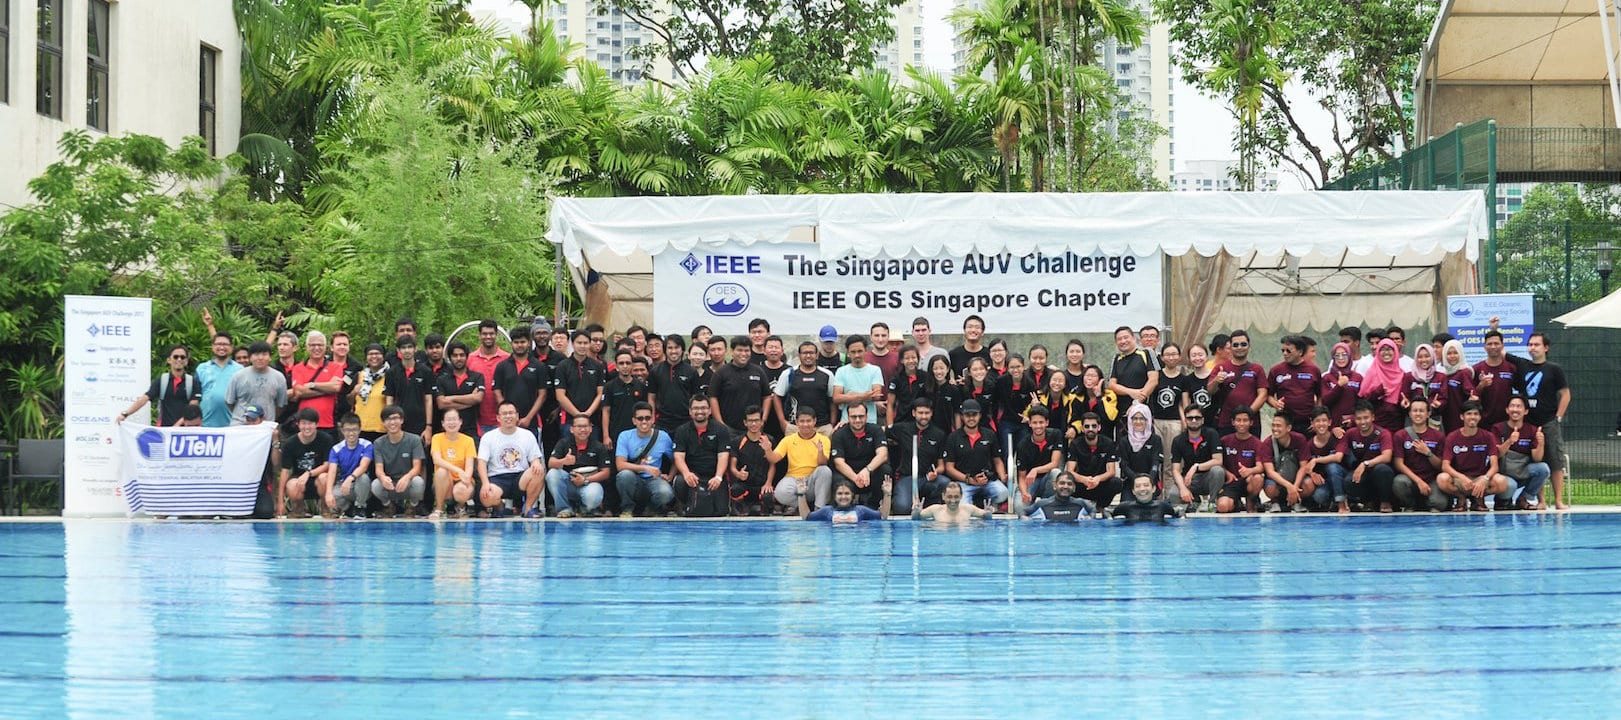 Student Autonomous Maritime Vehicle Competitions: International Coordination and Initial Benchmarking